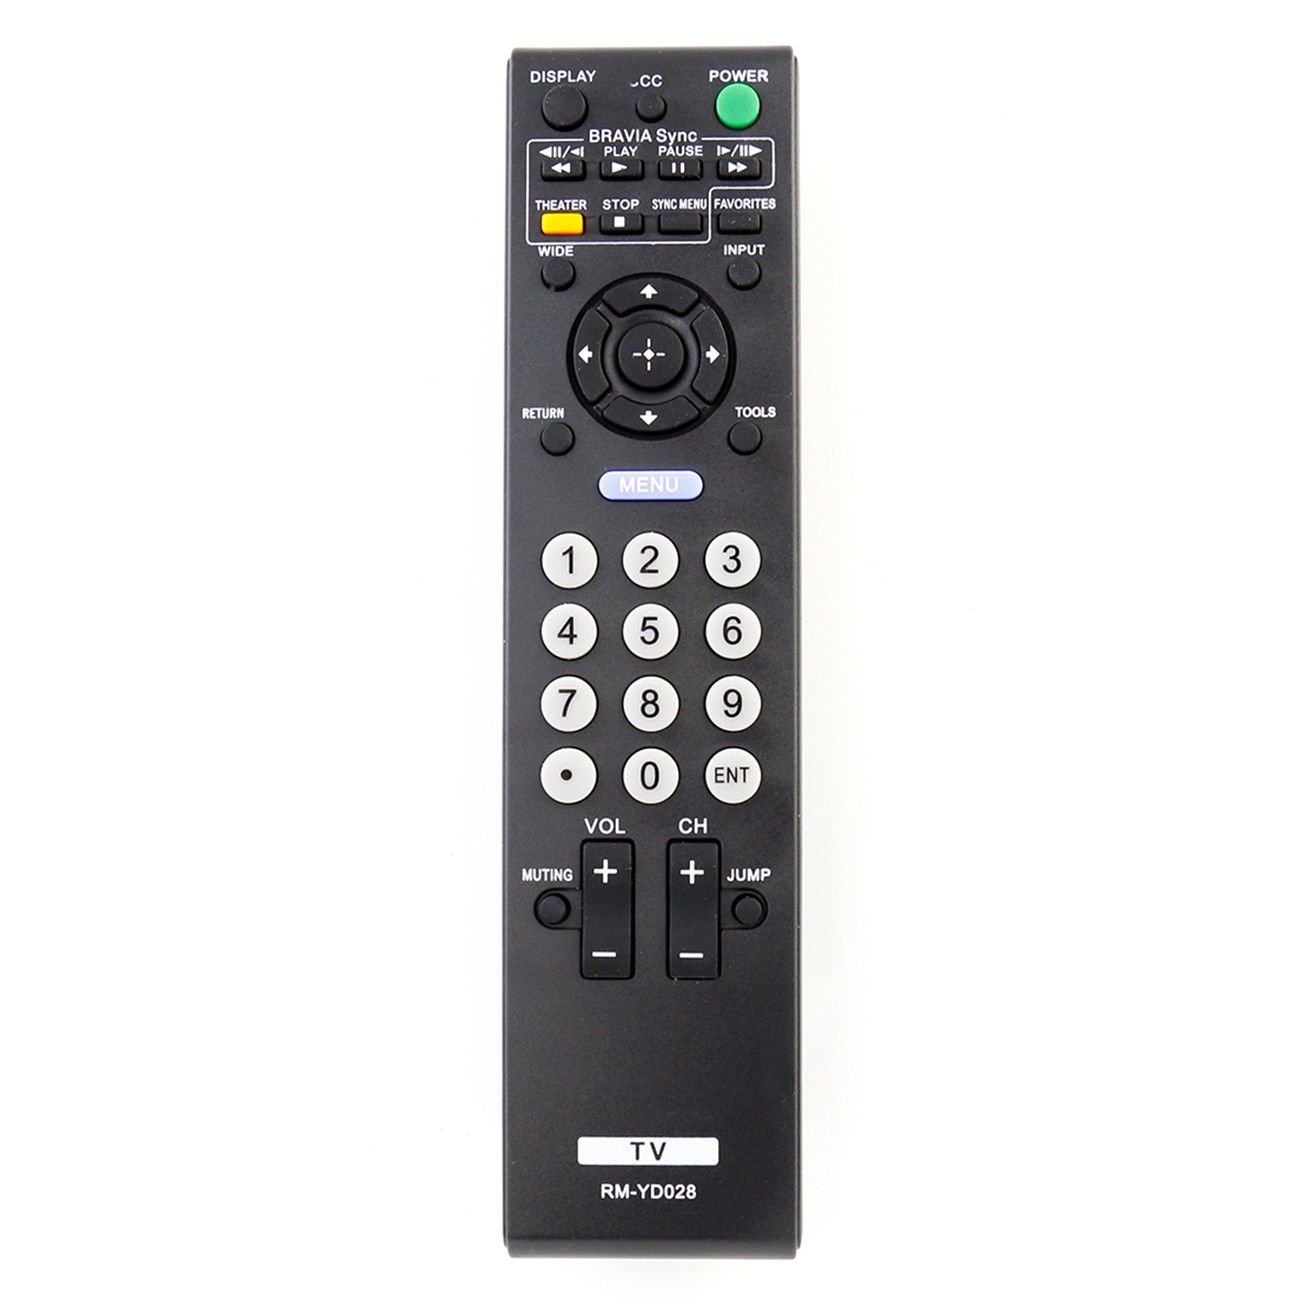 RM-YD028 Replacement Remote Control for Sony LCD HDTV KDL26L5000 KDL32L5000